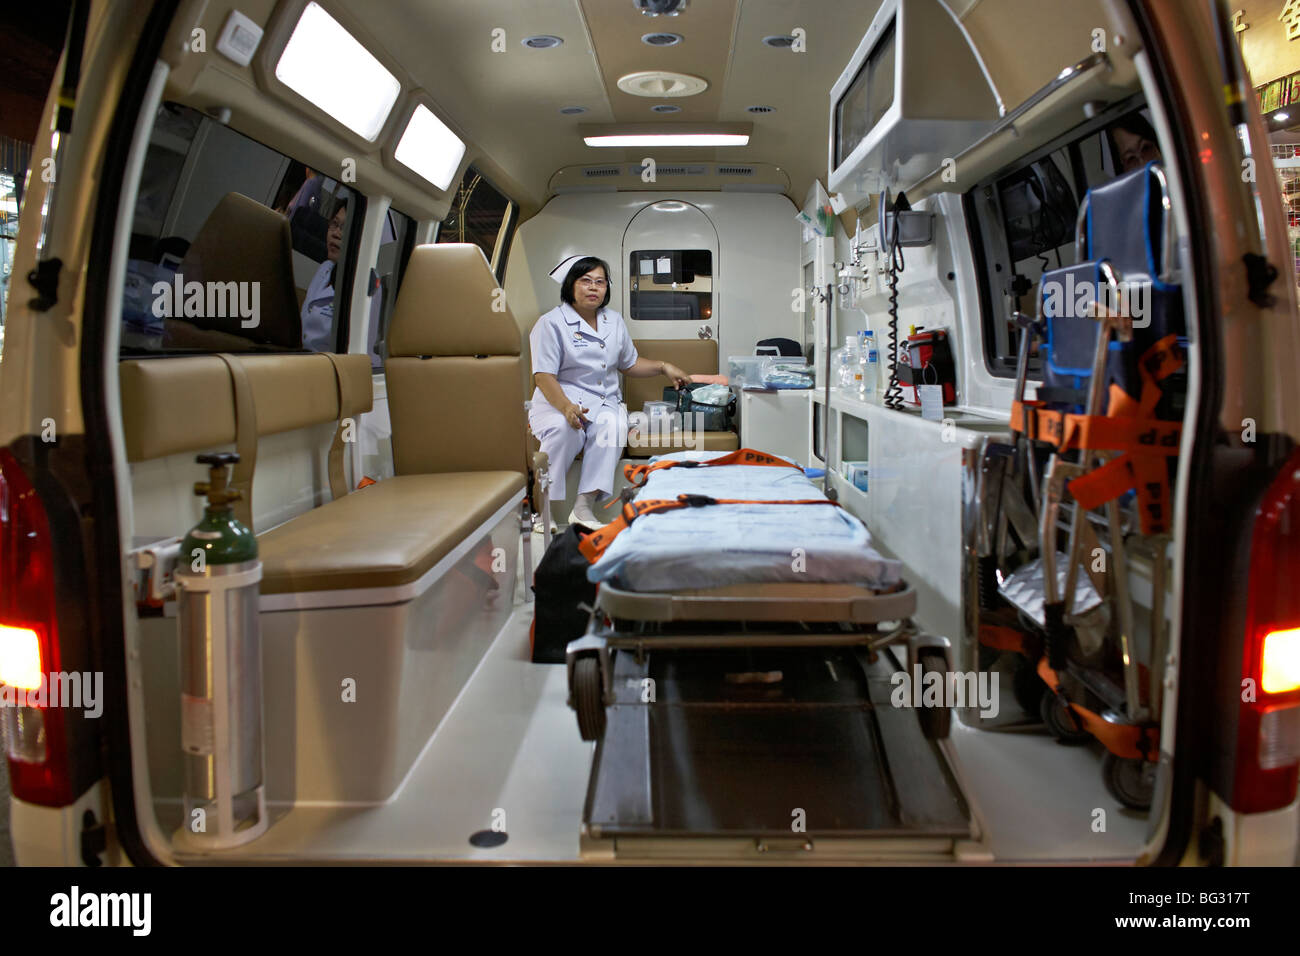 Interior View Of Fully Equipped Ambulance Thailand S E